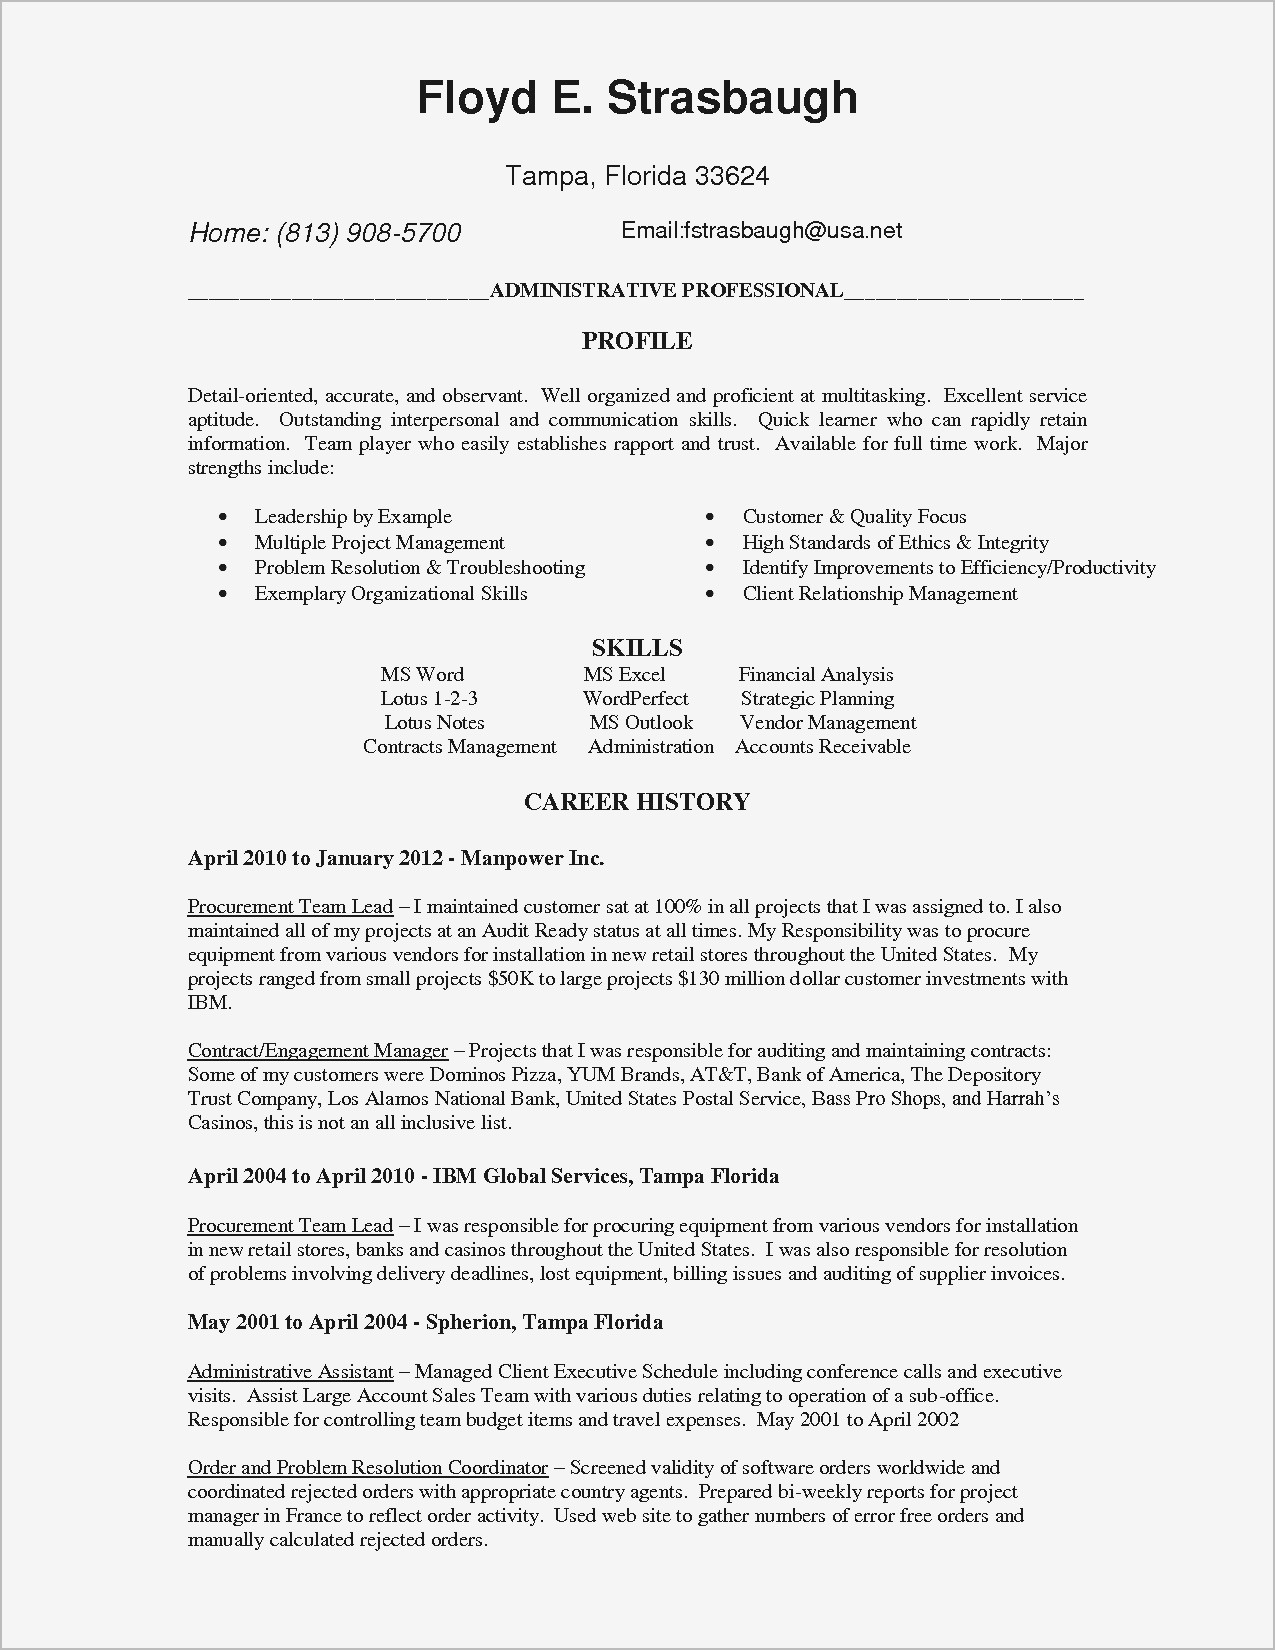 Job Application Cover Letter Template Word - Word Cover Letter Template Pdf format